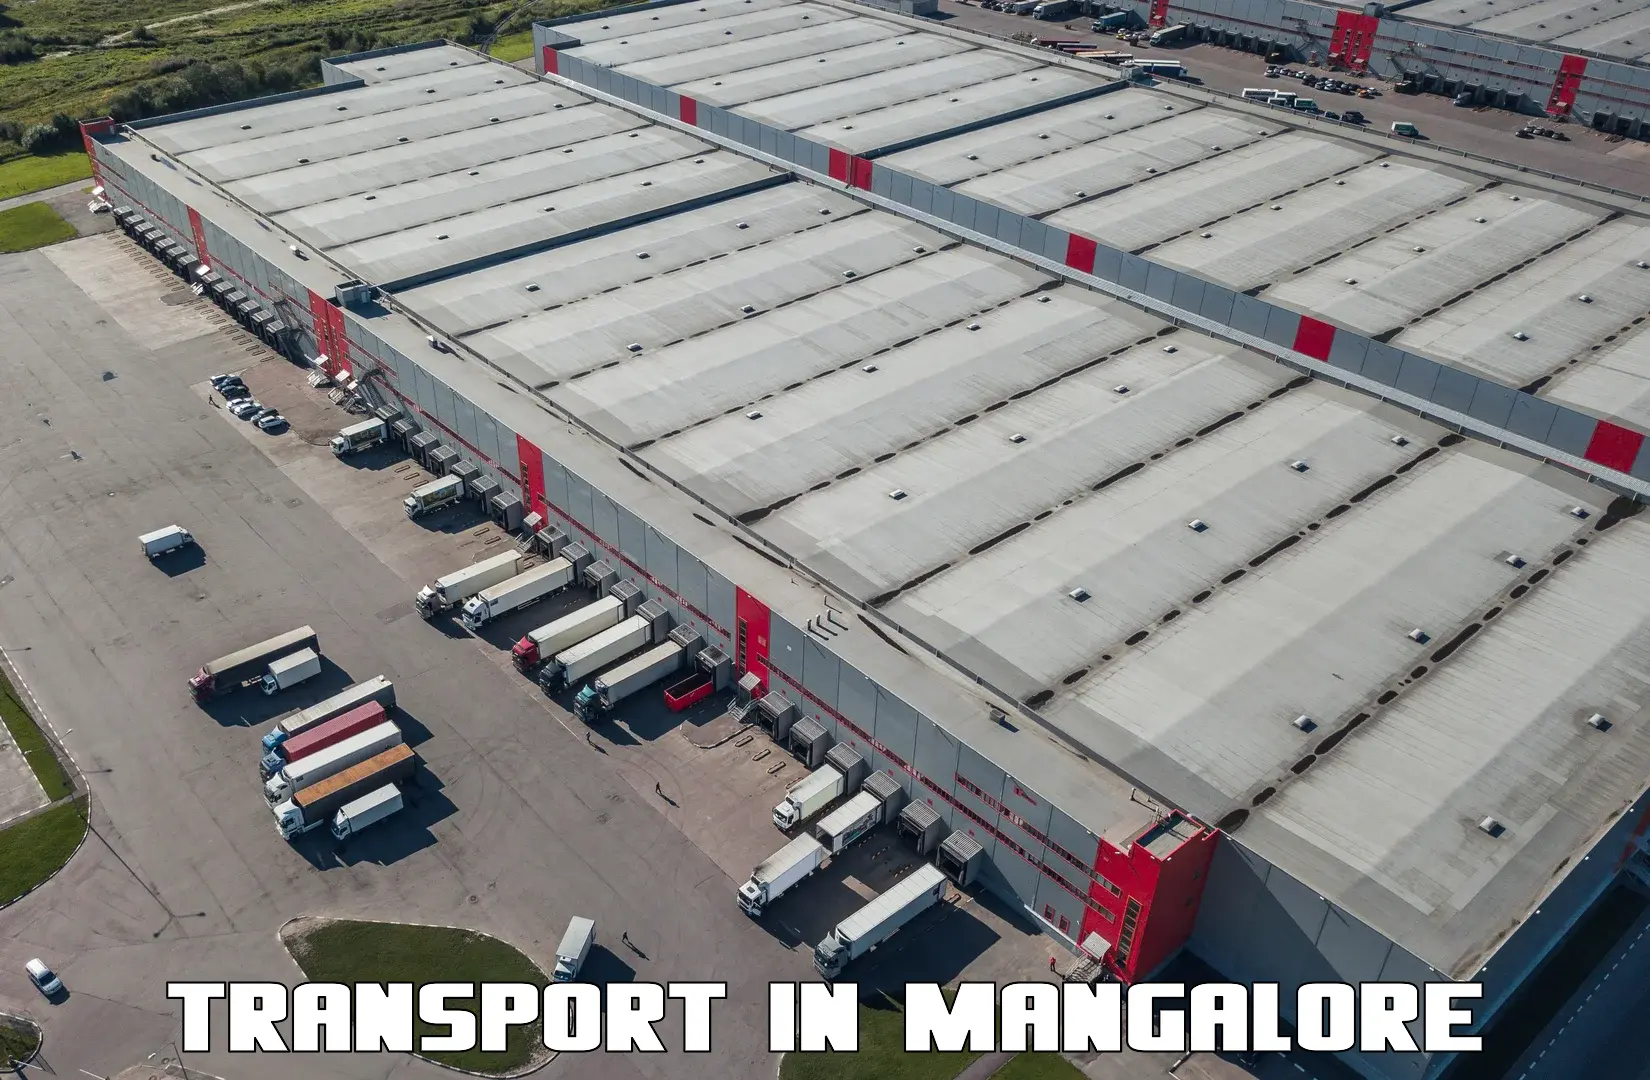 Cargo train transport services in Mangalore